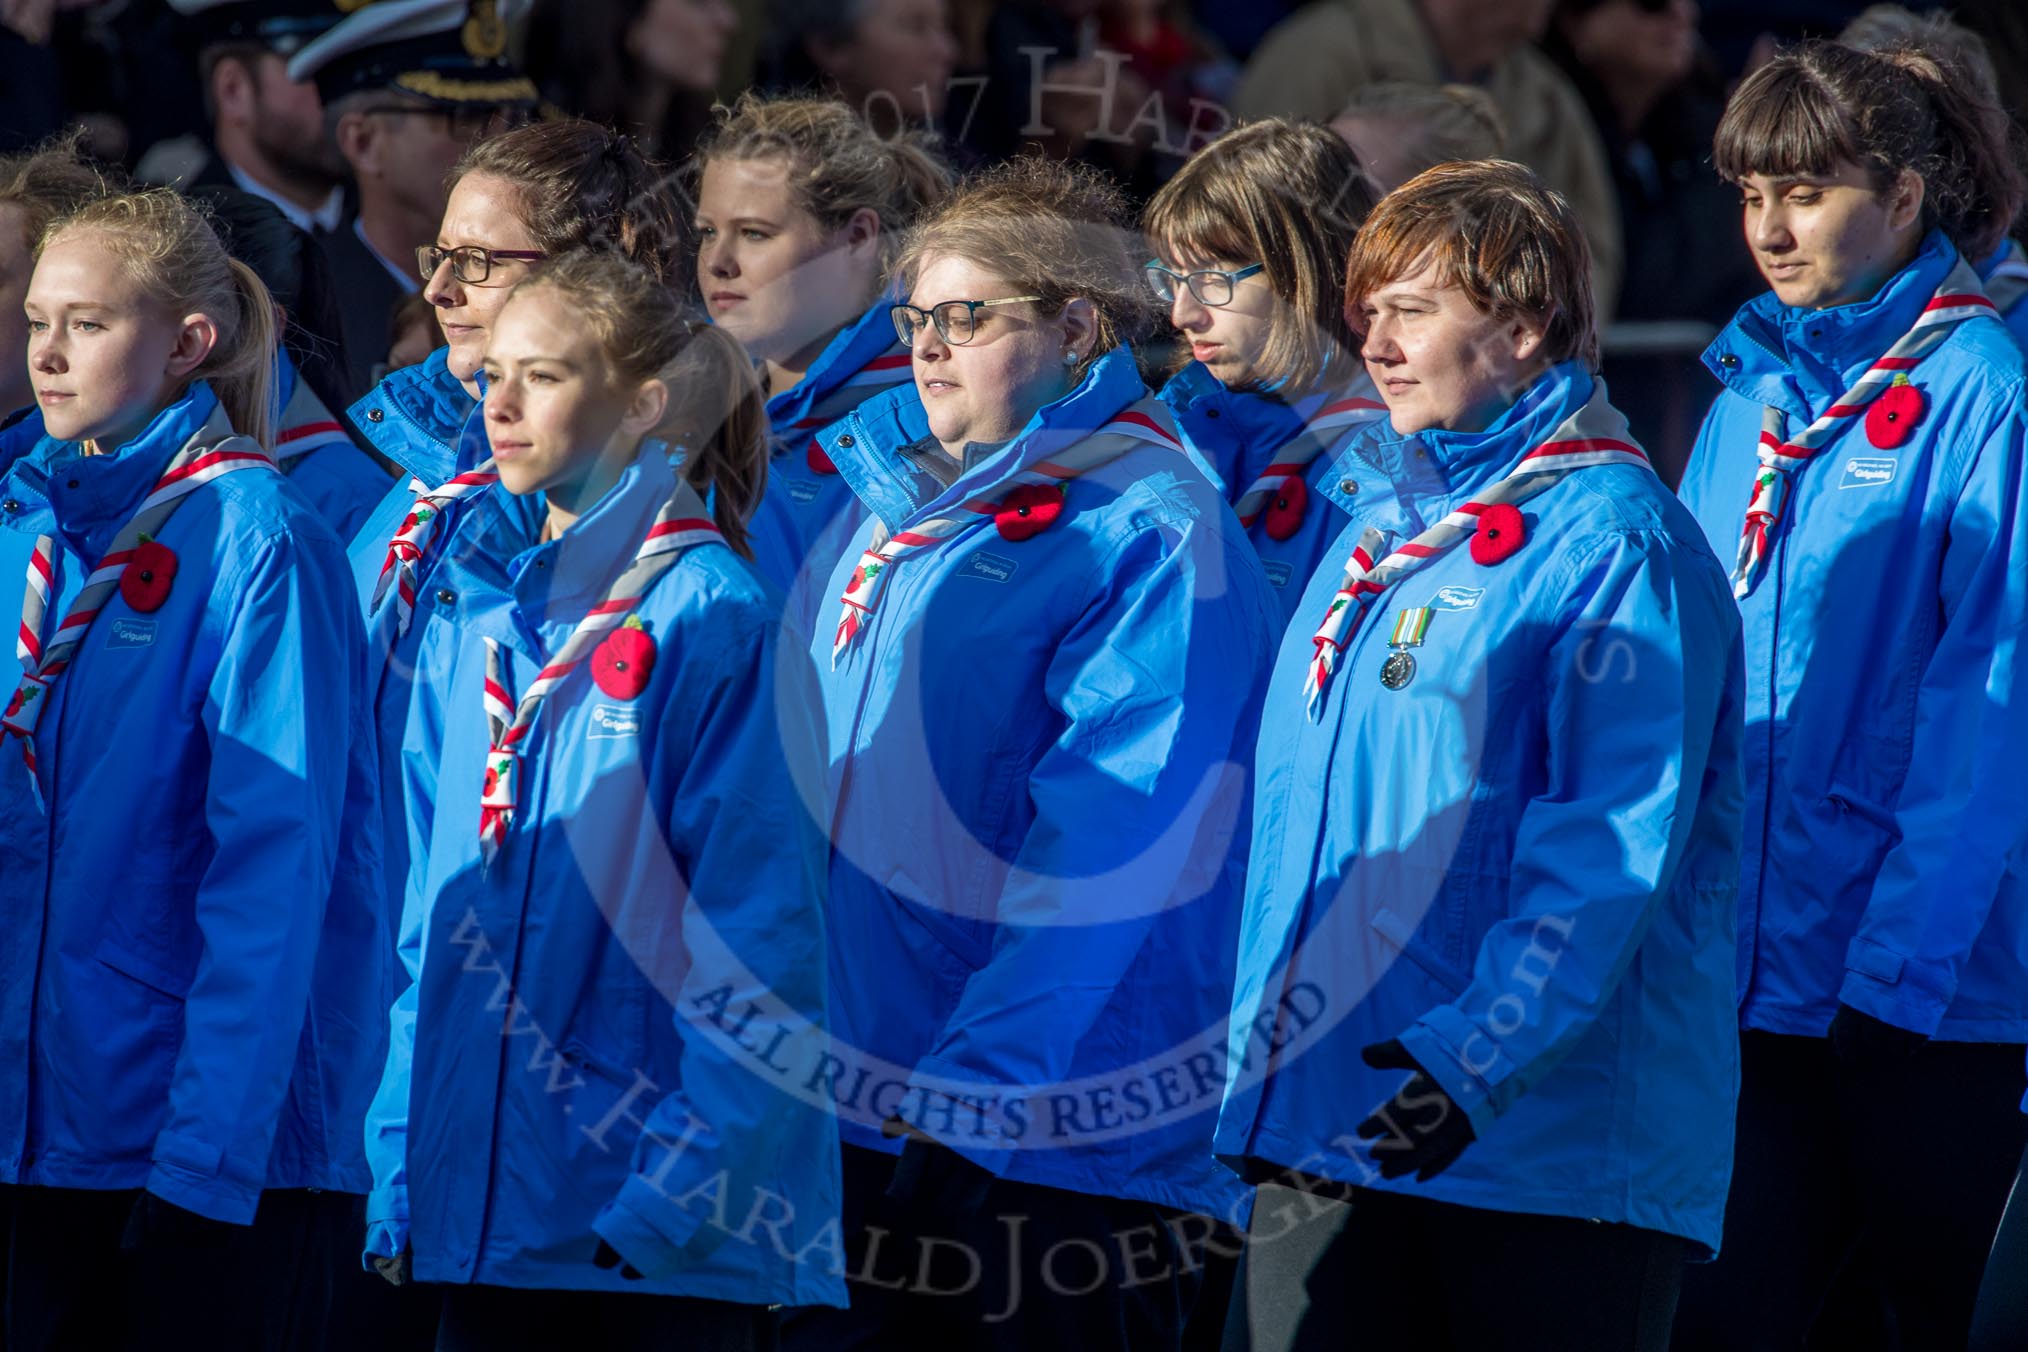 Girlguiding London and South East England(Group M38, 40 members) during the Royal British Legion March Past on Remembrance Sunday at the Cenotaph, Whitehall, Westminster, London, 11 November 2018, 12:30.